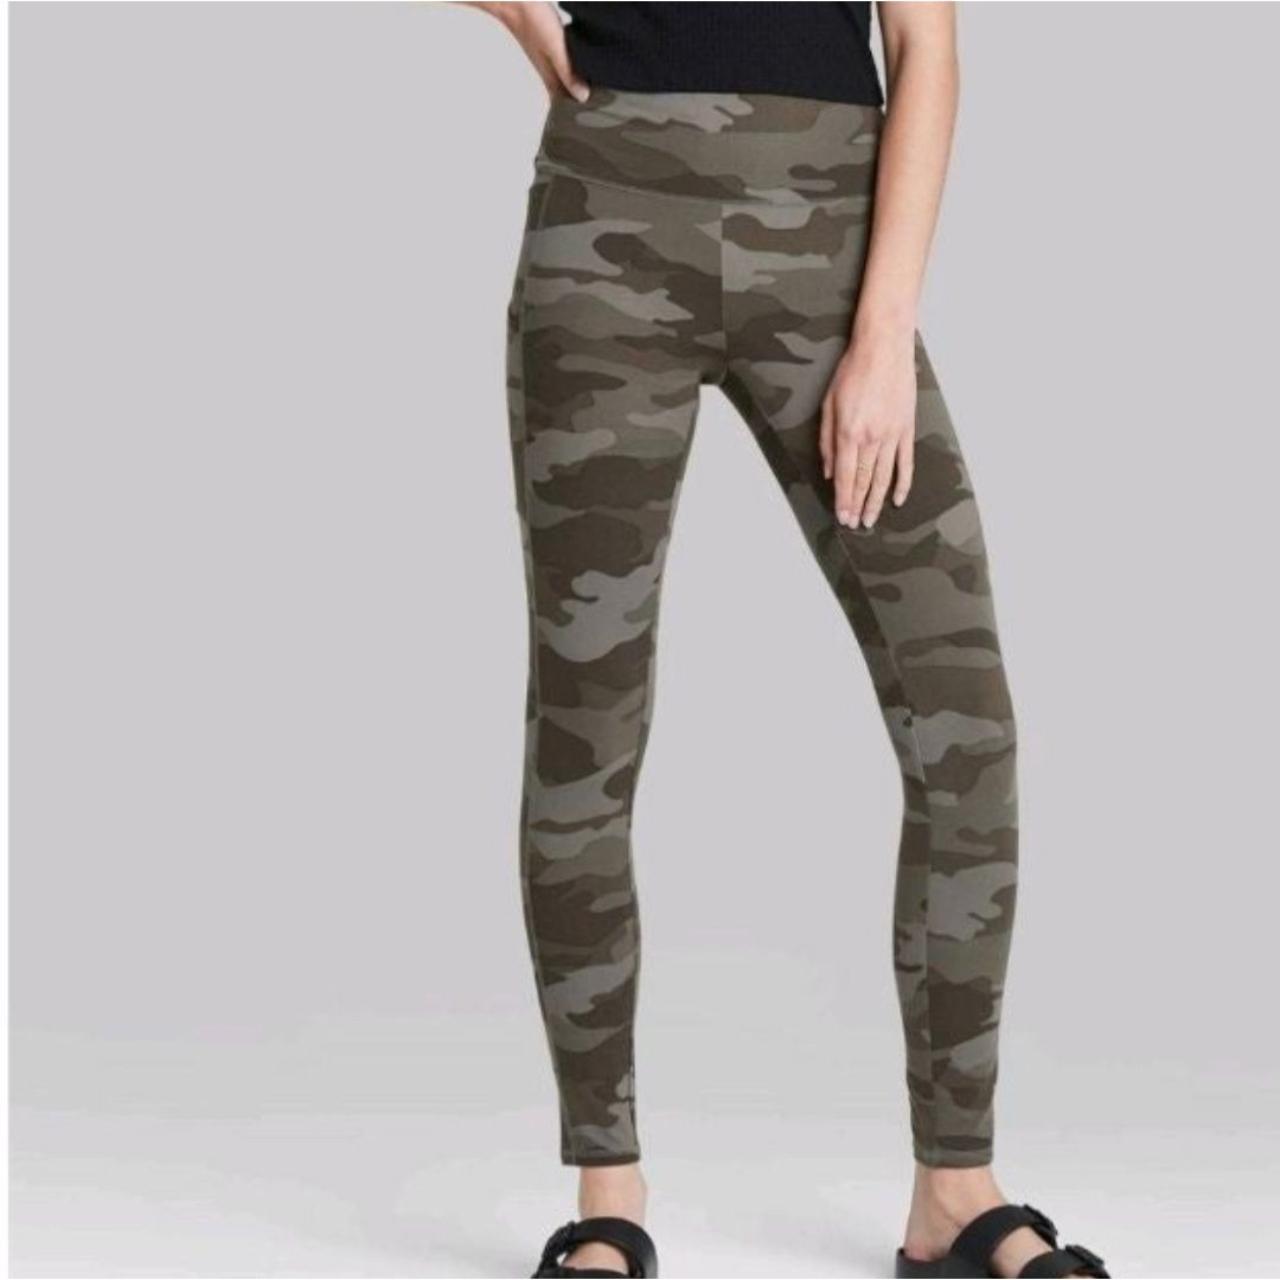 Women's High-Waisted Pocket Leggings Wild Fable Olive Green Size